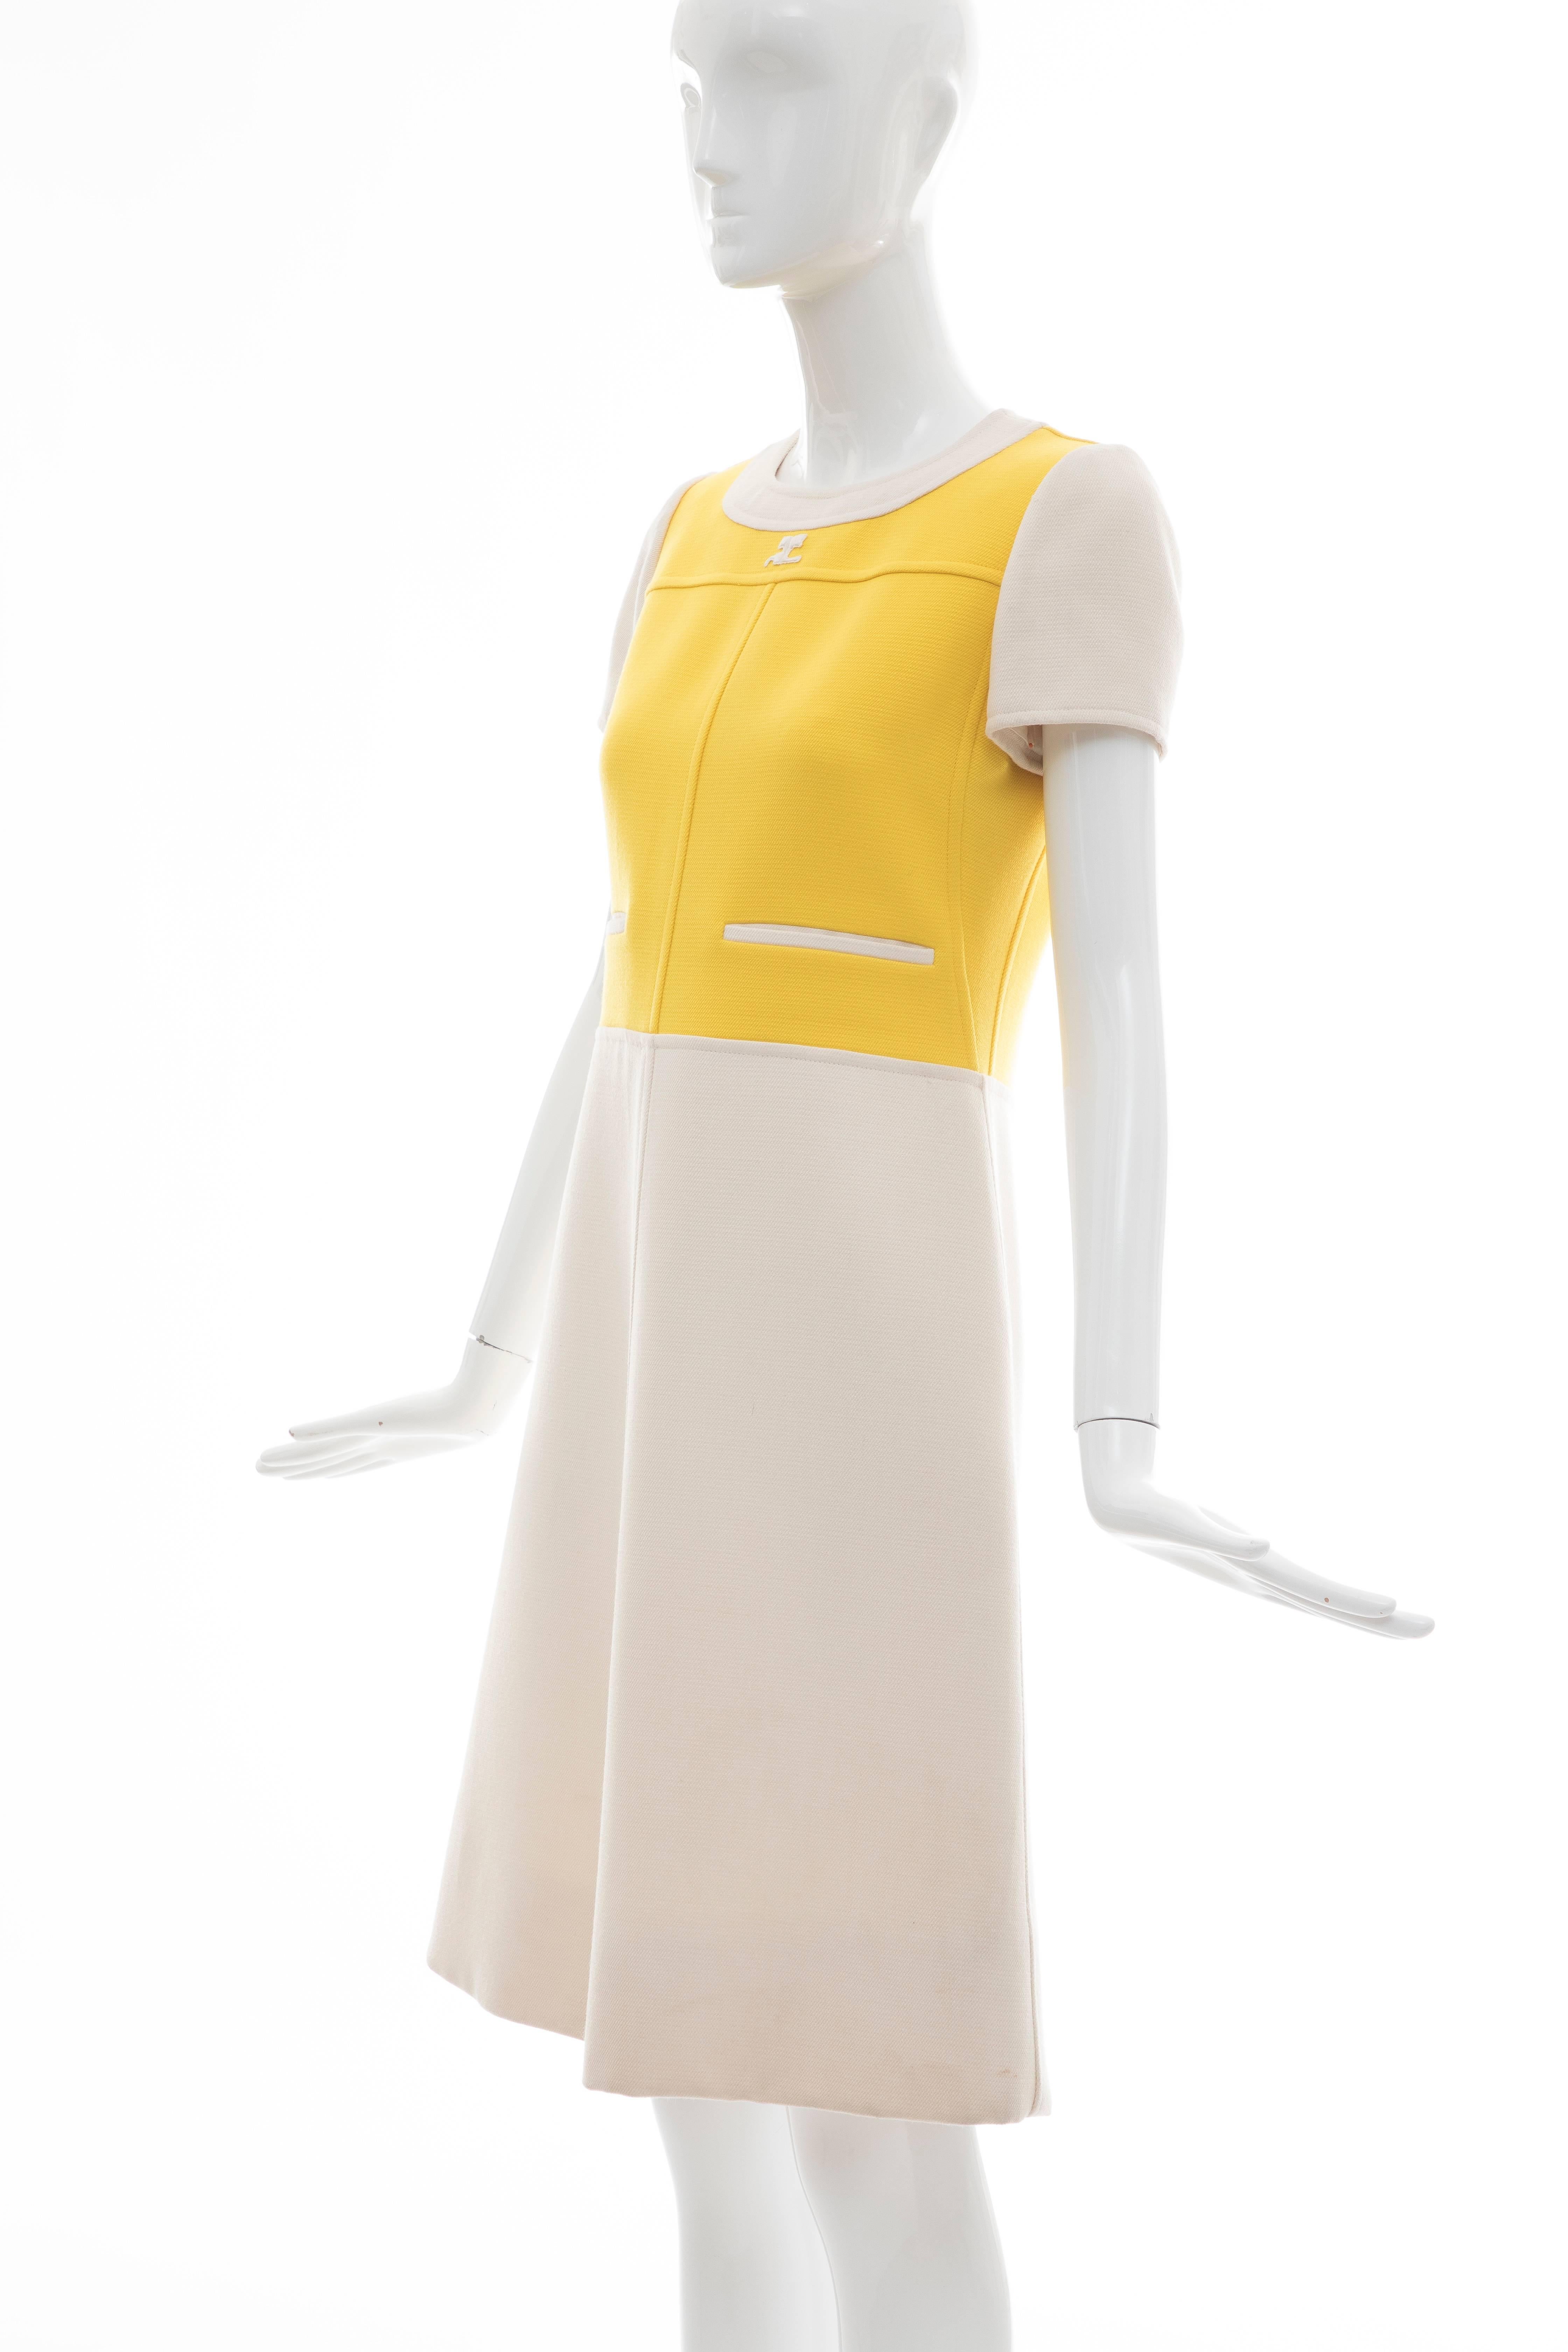 Andre Courreges Wool A-Line Dress , Circa 1960's For Sale 4